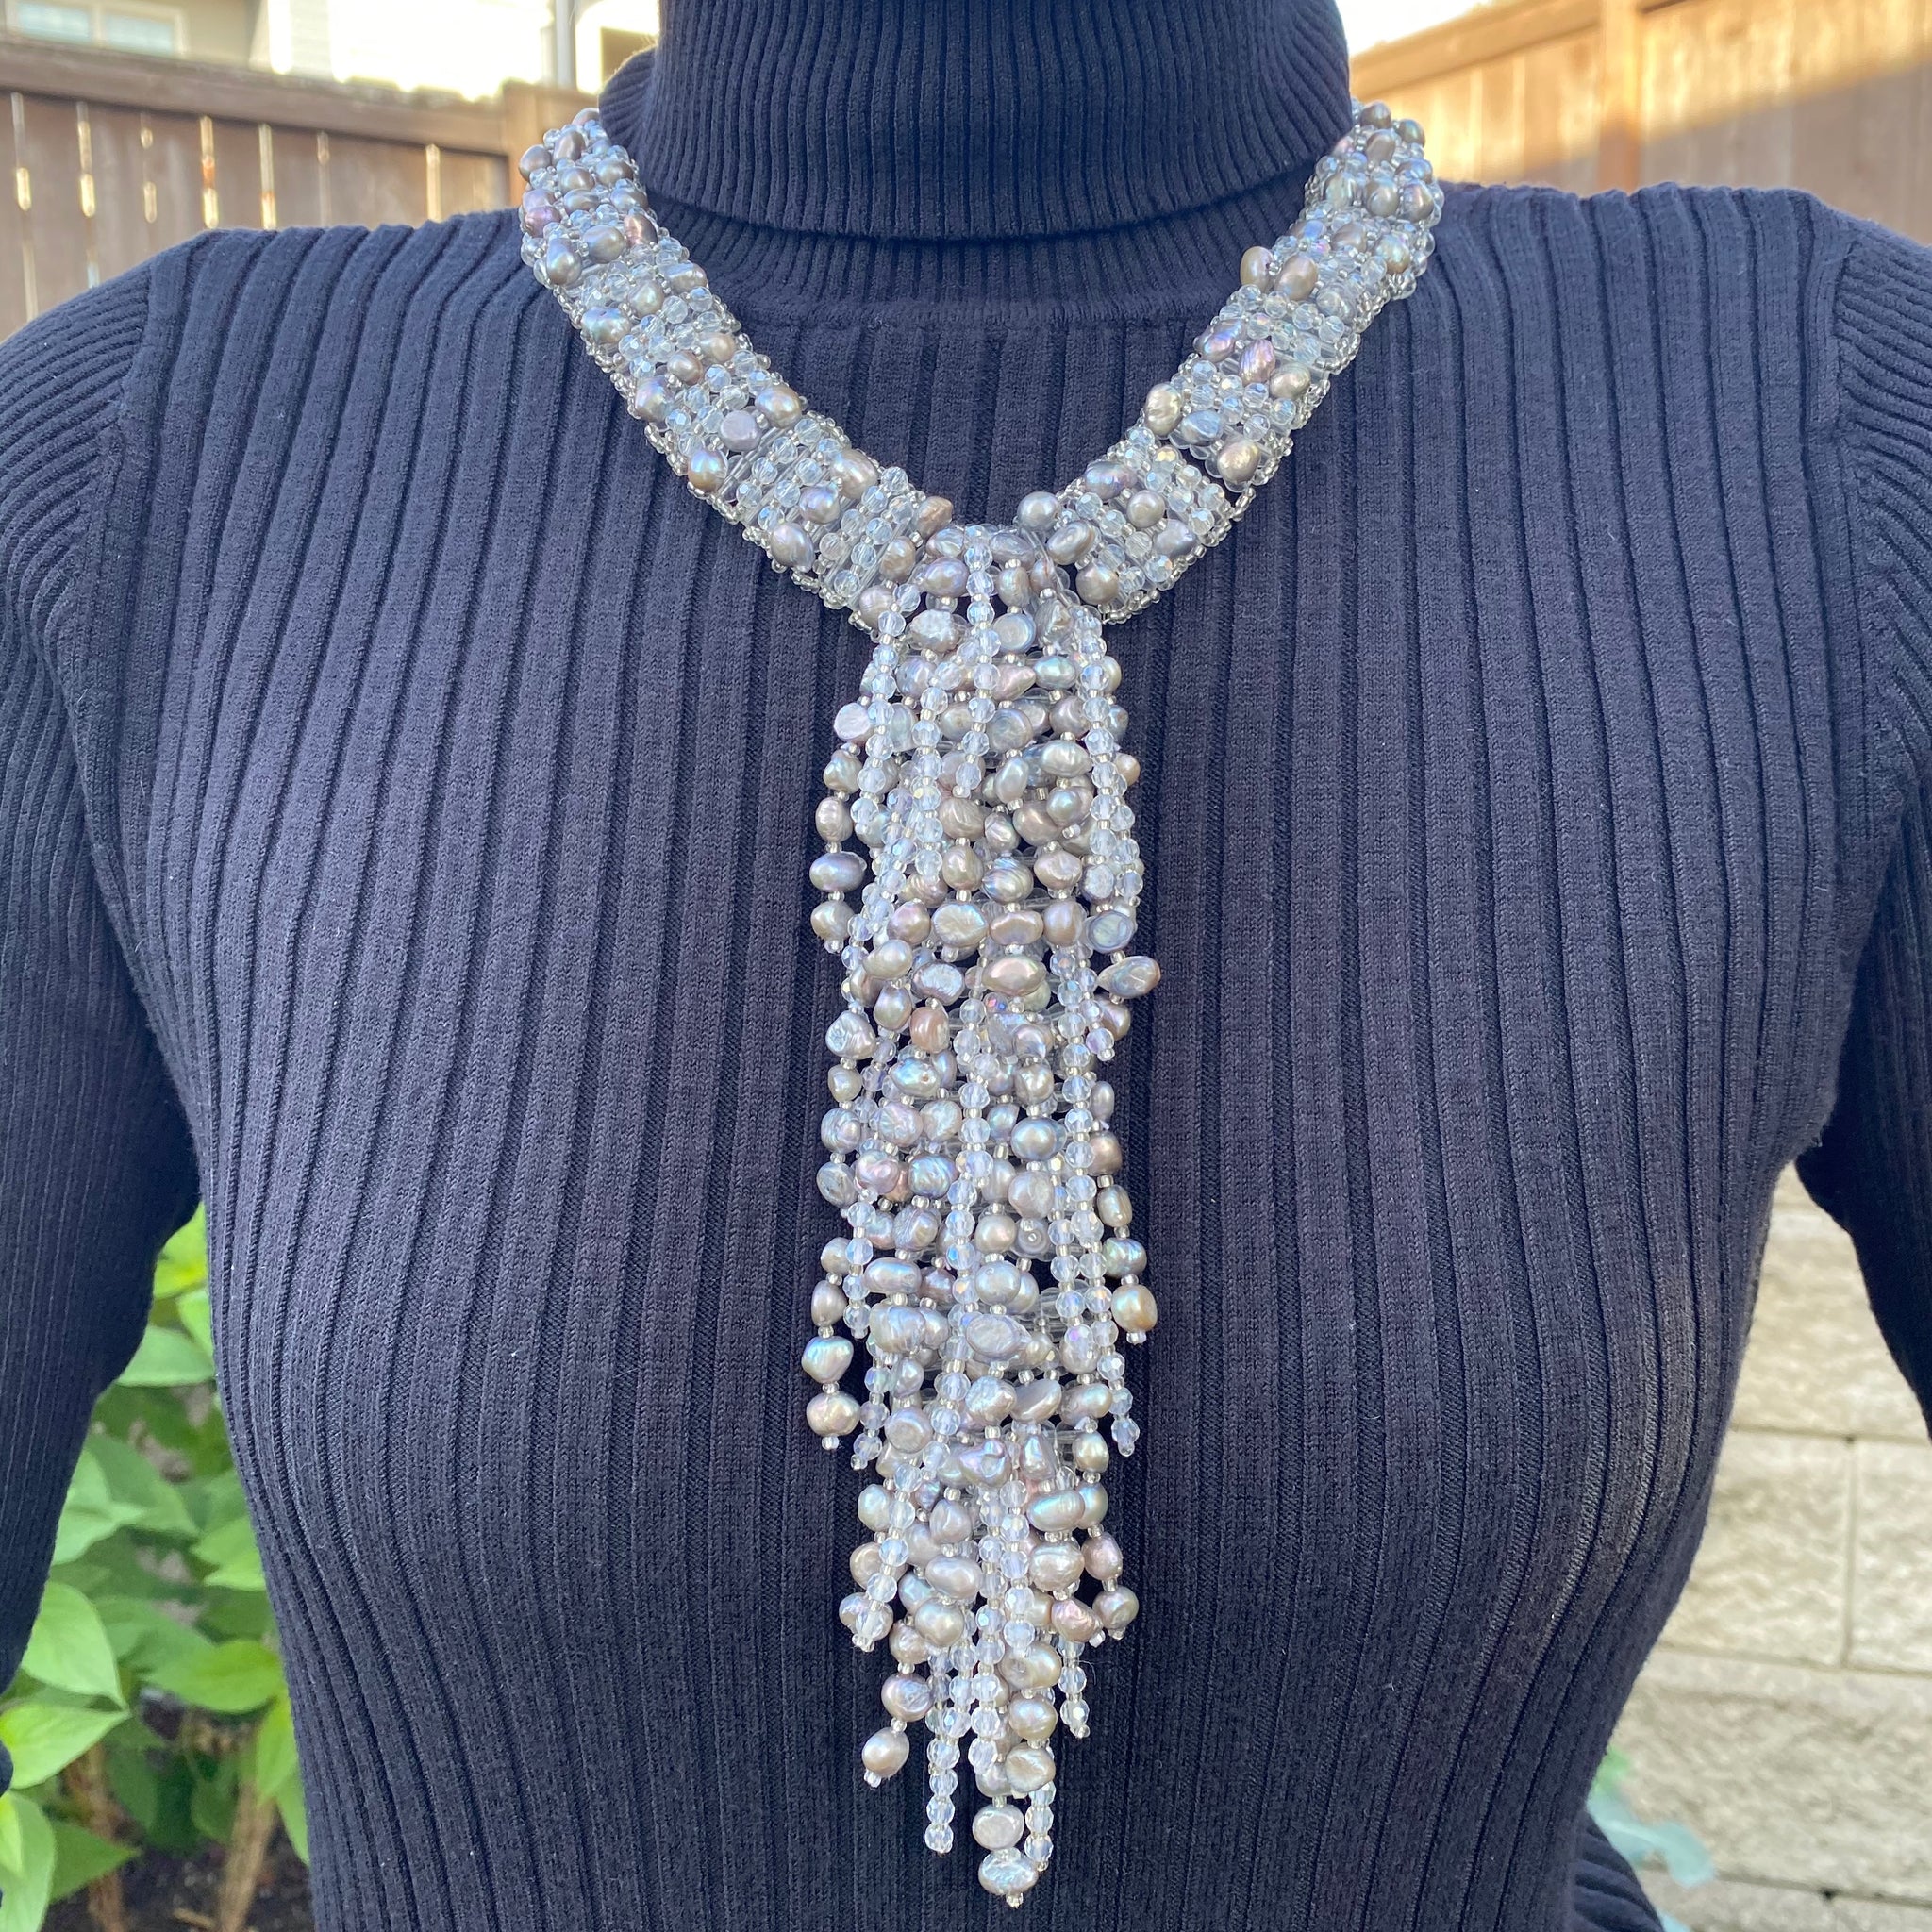 Handmade Stunning Tassels Necklace 20" Unique Freshwater Pearls Beads